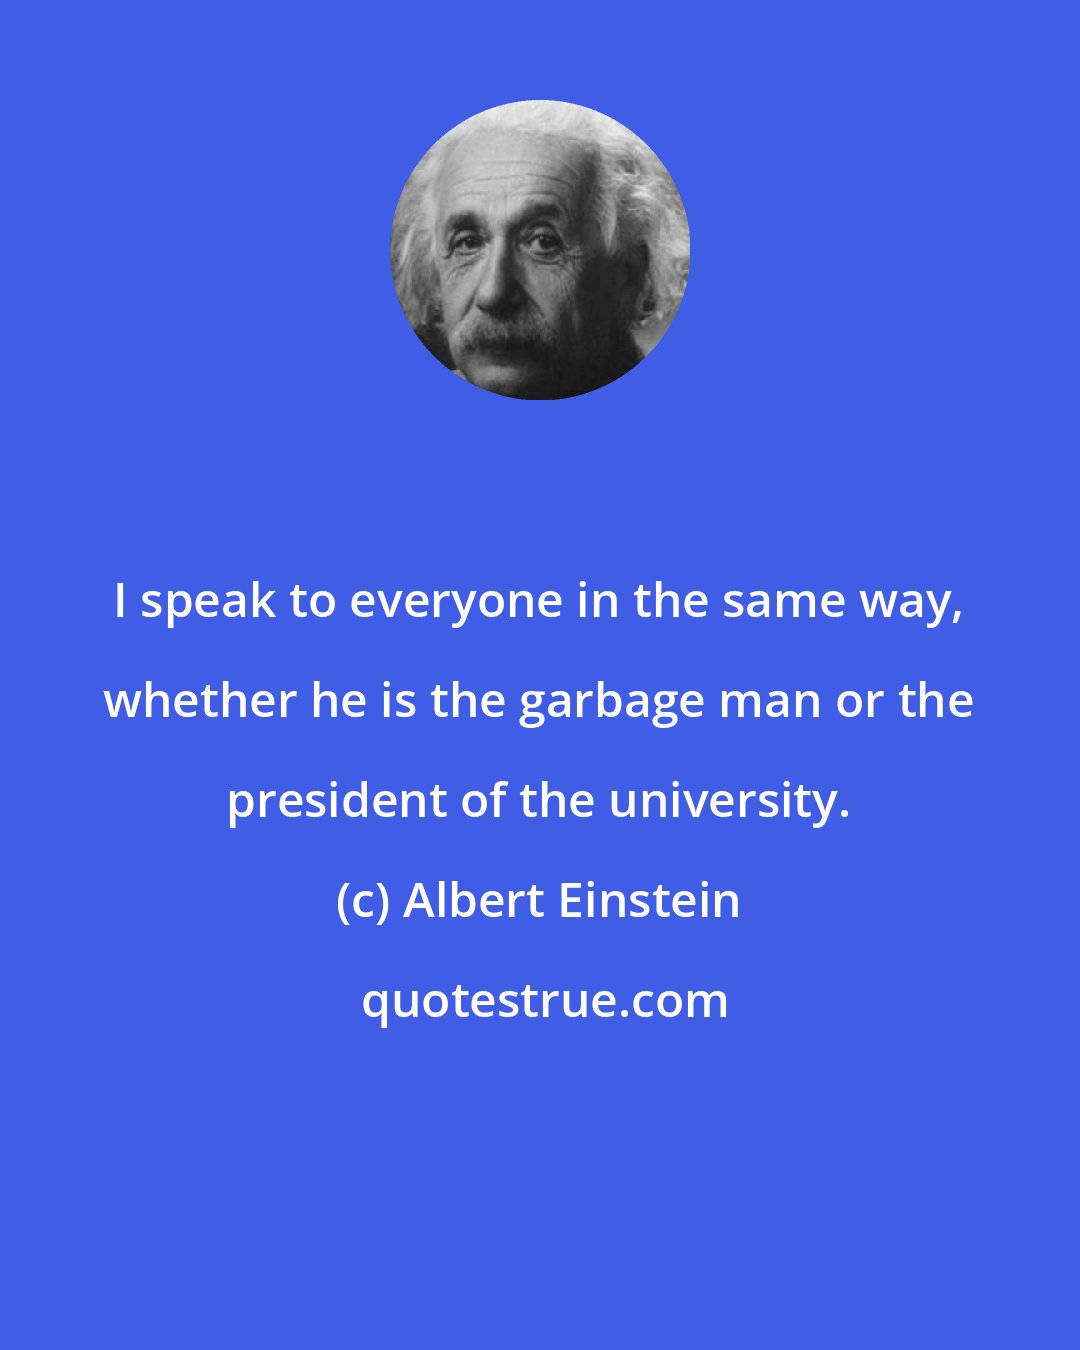 Albert Einstein: I speak to everyone in the same way, whether he is the garbage man or the president of the university.